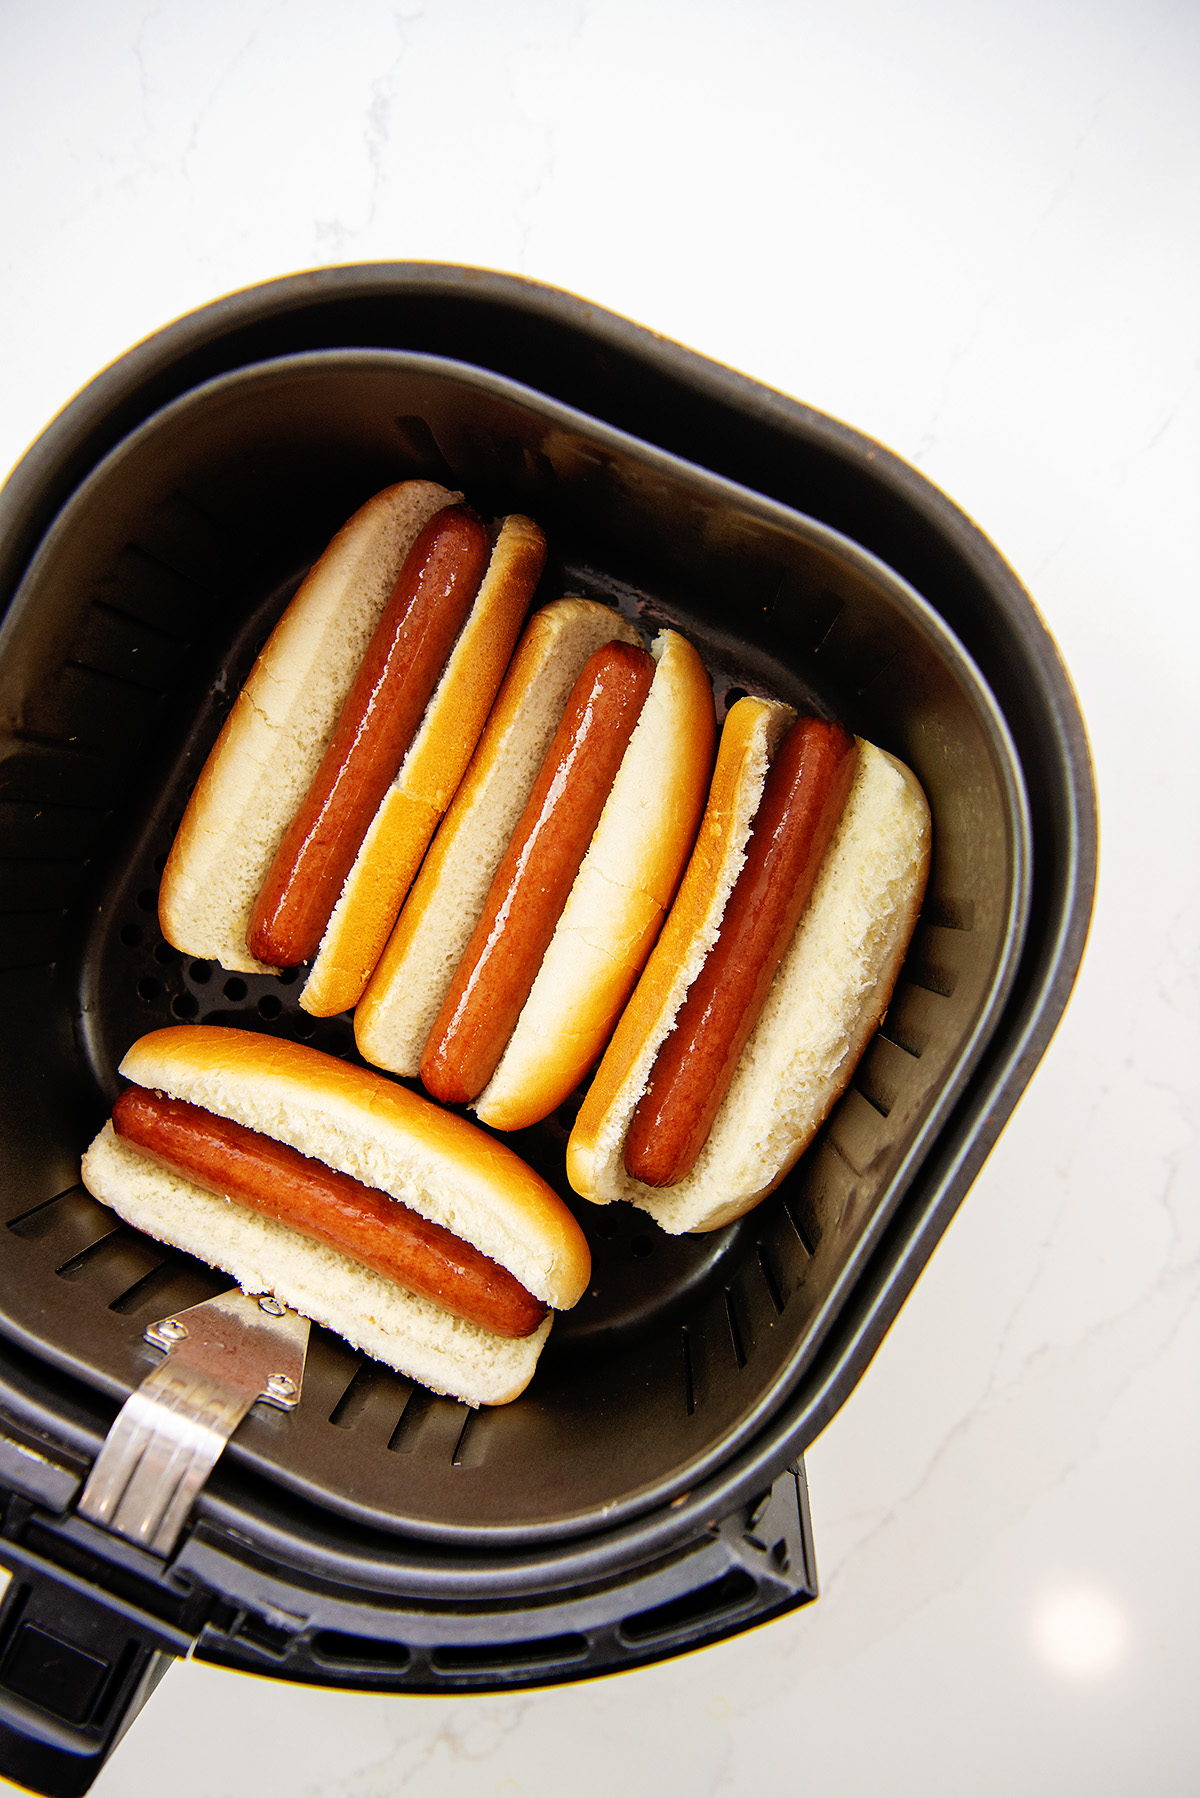 Overhead view of cooked hot dogs in an air fryer basket